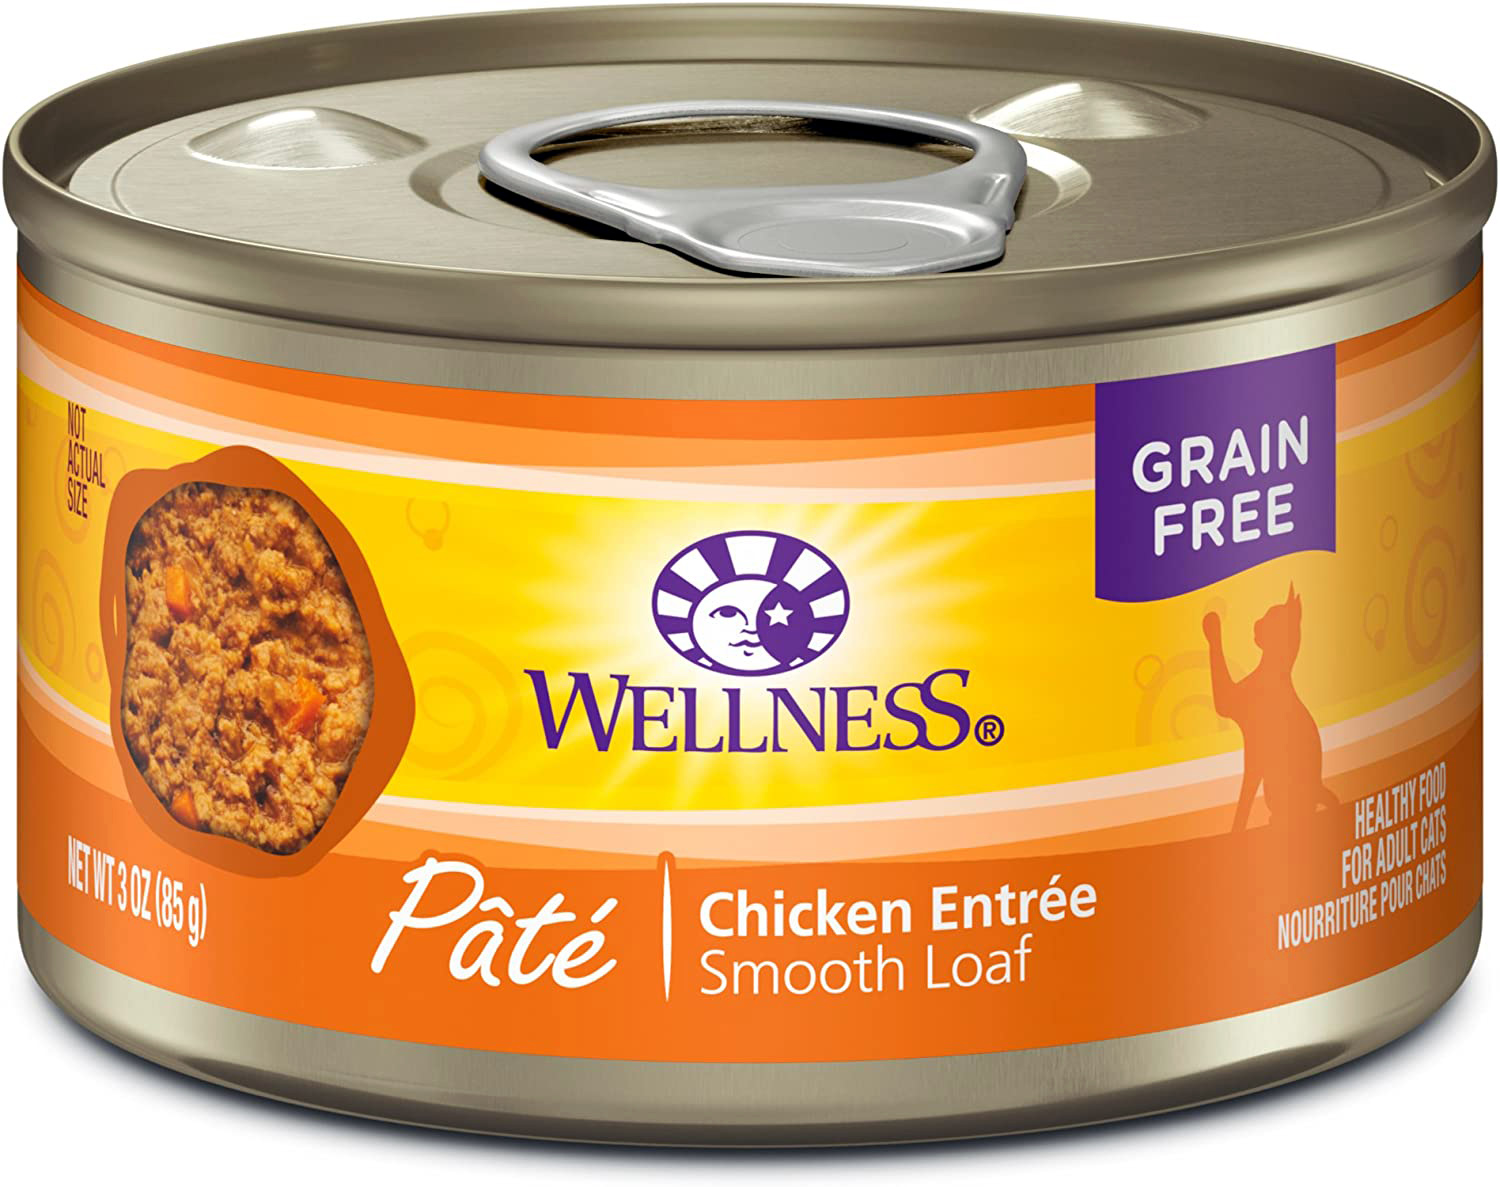 Wellness complete health pate chicken entree grain-free canned cat food